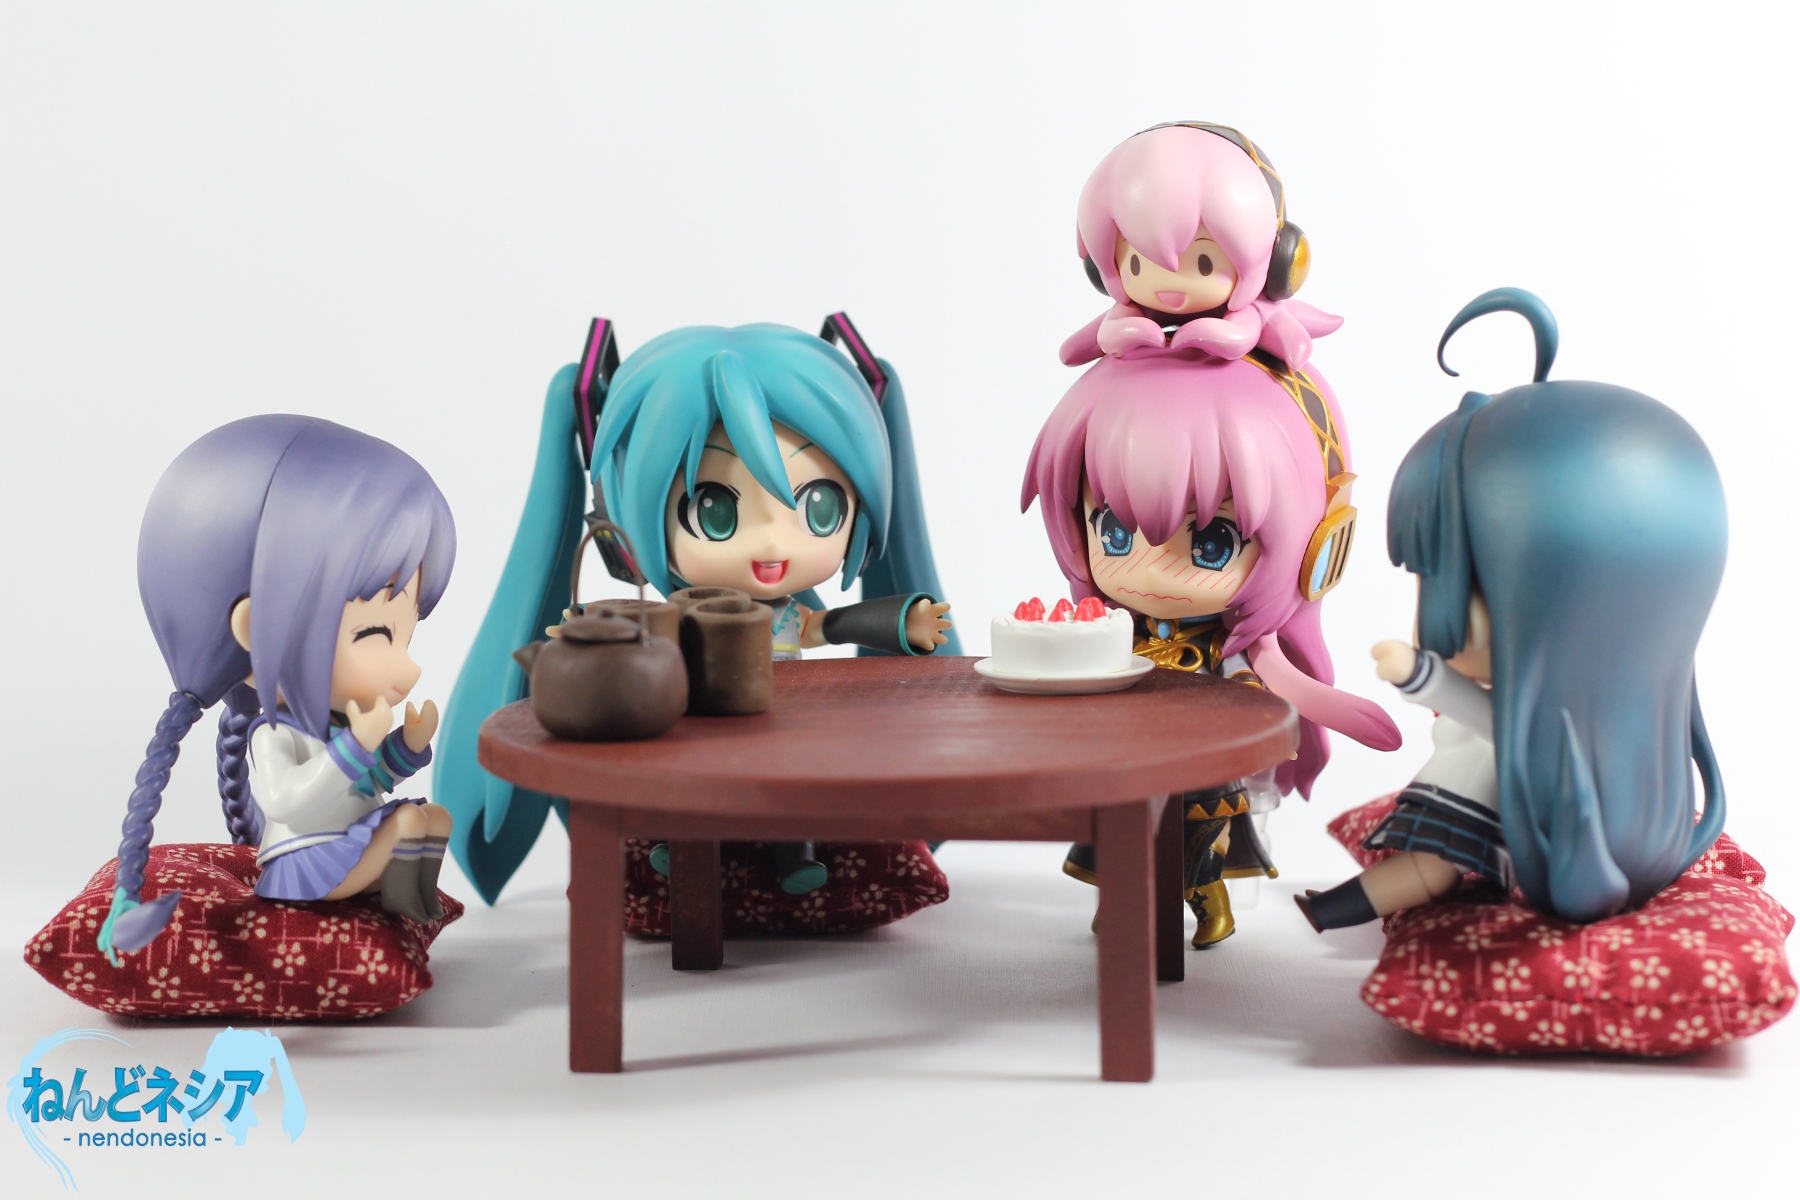 an image of a group of figurines sitting around a table